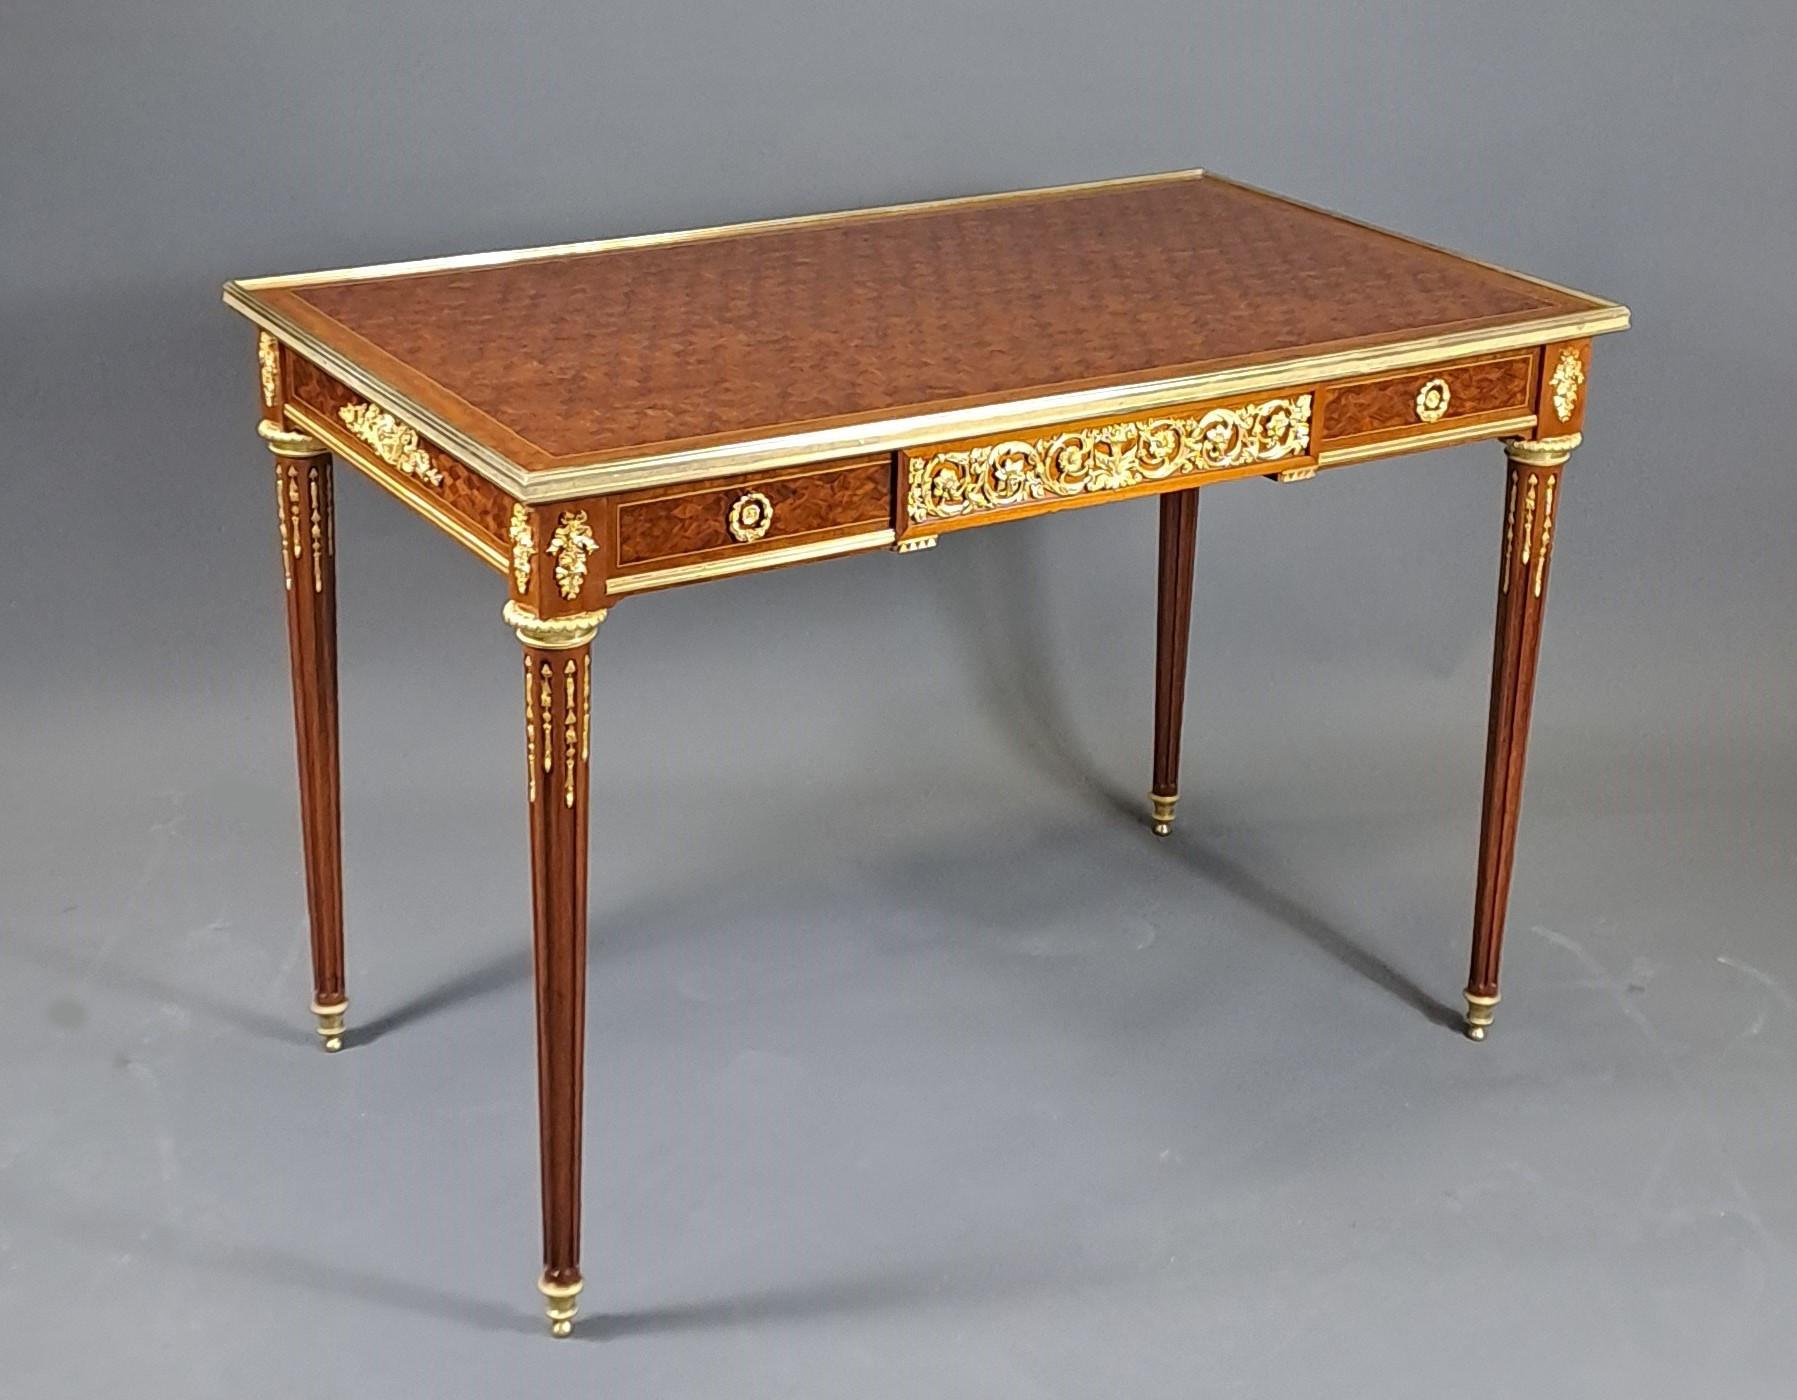 Magnificent Louis XVI style center table in mahogany and rosewood marquetry.

Superb ornamentation of very finely chiseled gilded bronze.

Opening a large drawer.

Parisian work from the second half of the 19th century, of exceptional quality, model